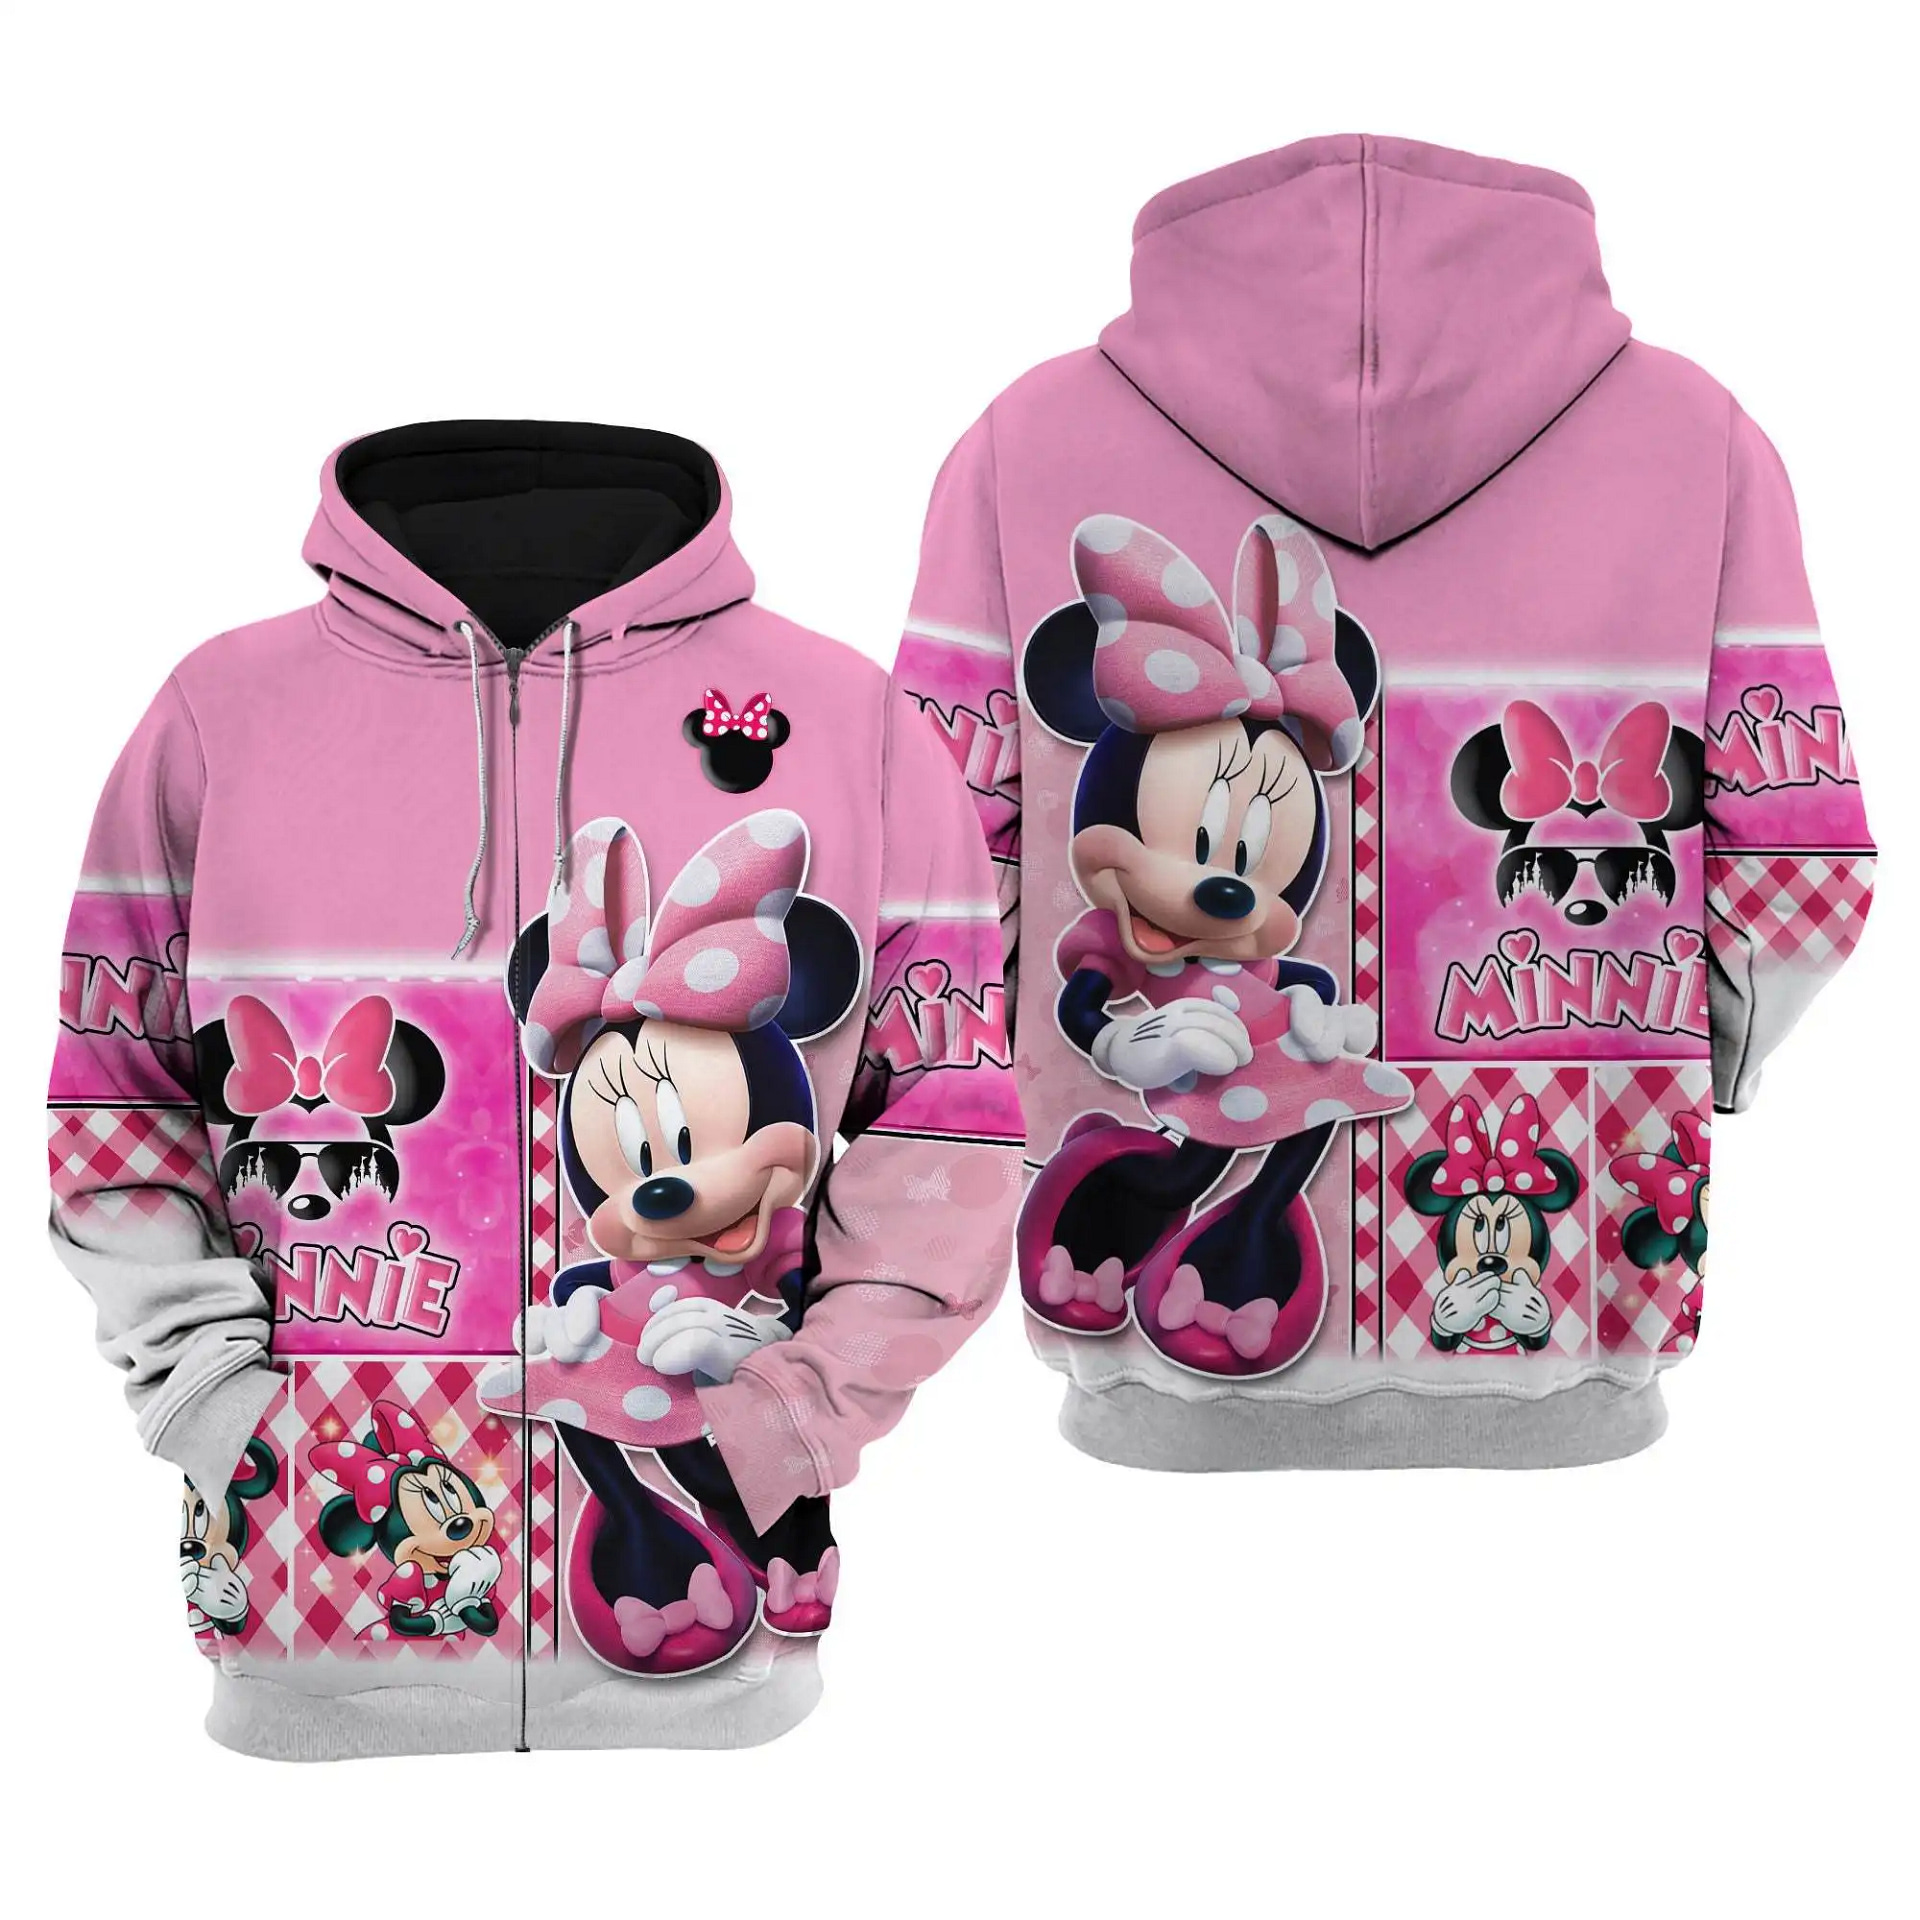 Pink Minnie Mouse Disney Cartoon Graphic Outfits Clothing Men Women Kids Toddlers Hoodie 3D